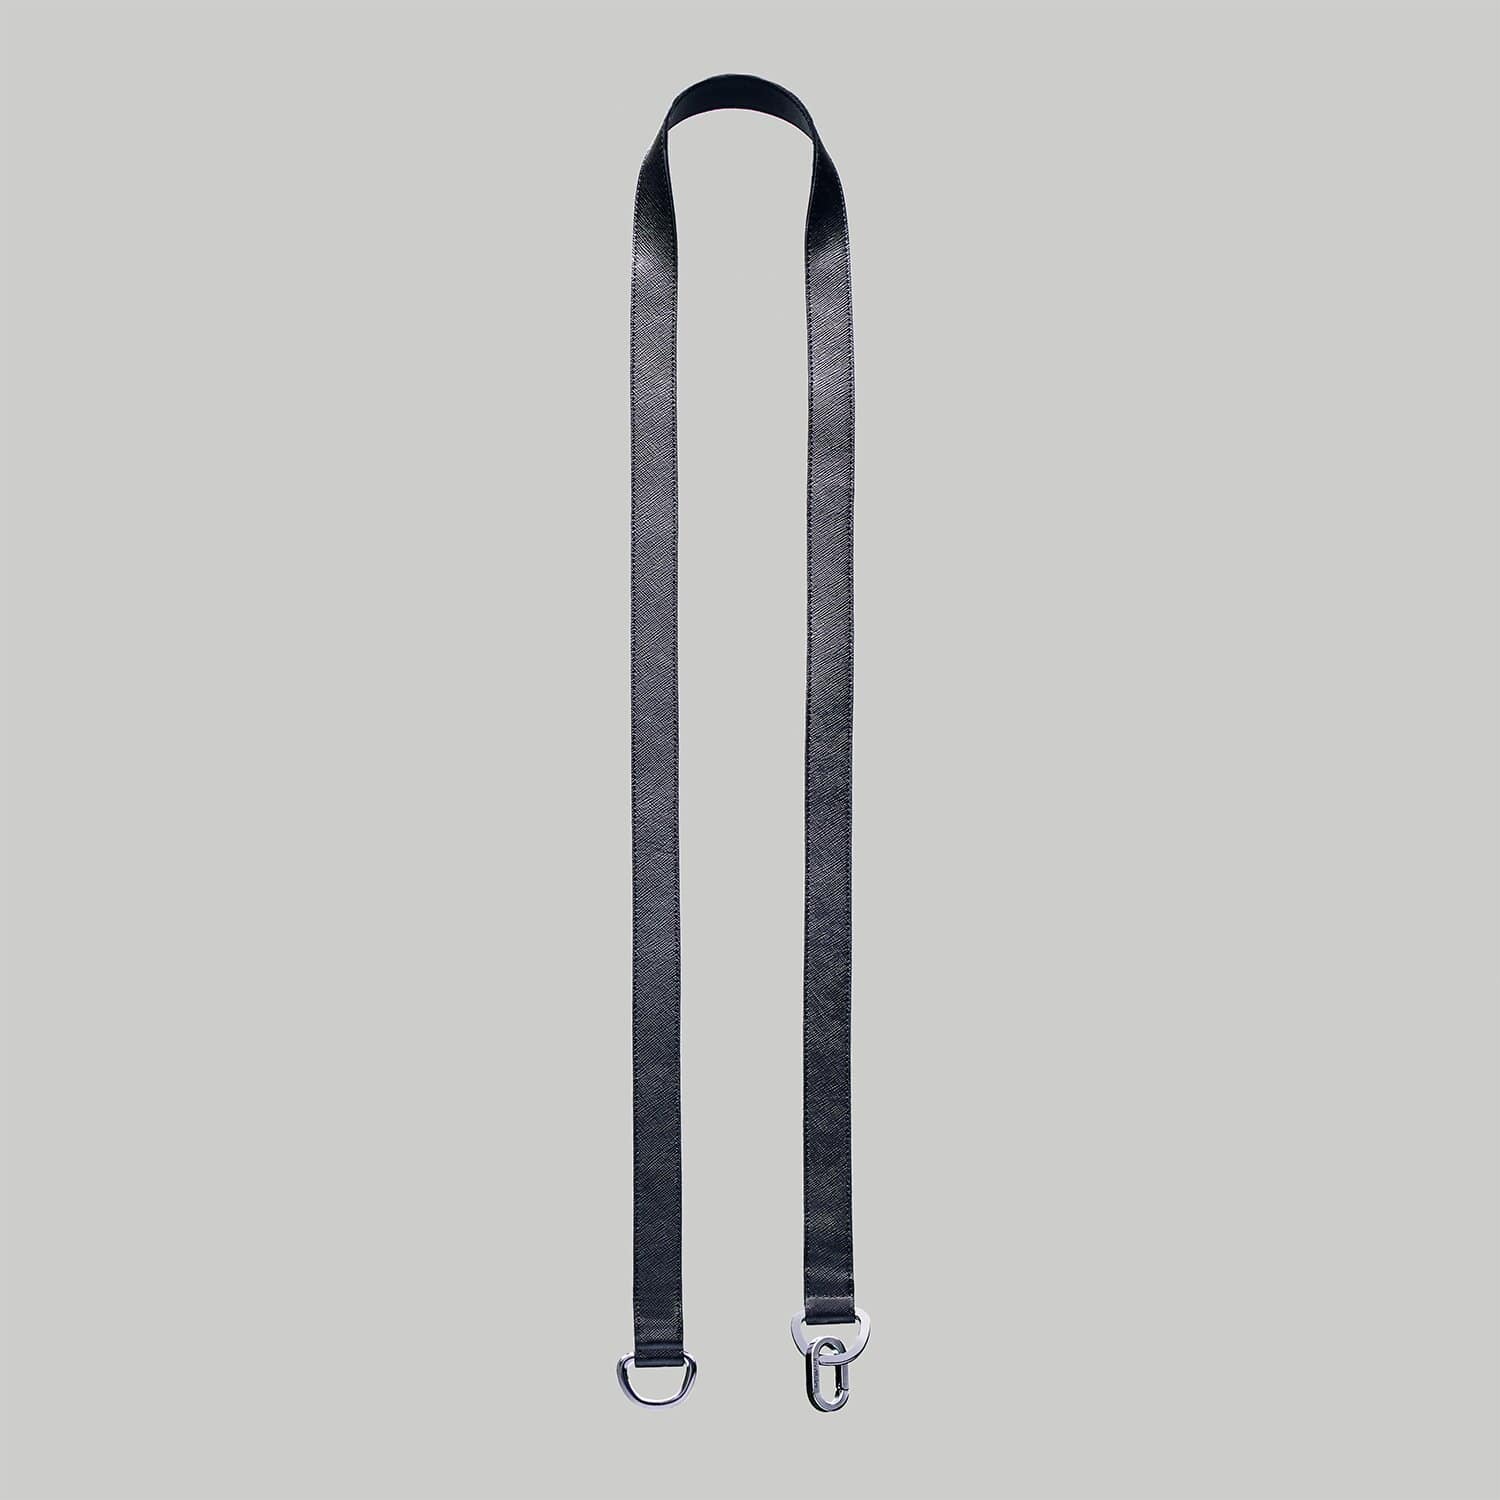 Luxury dog leash in black Saffiano leather with Ruthenium